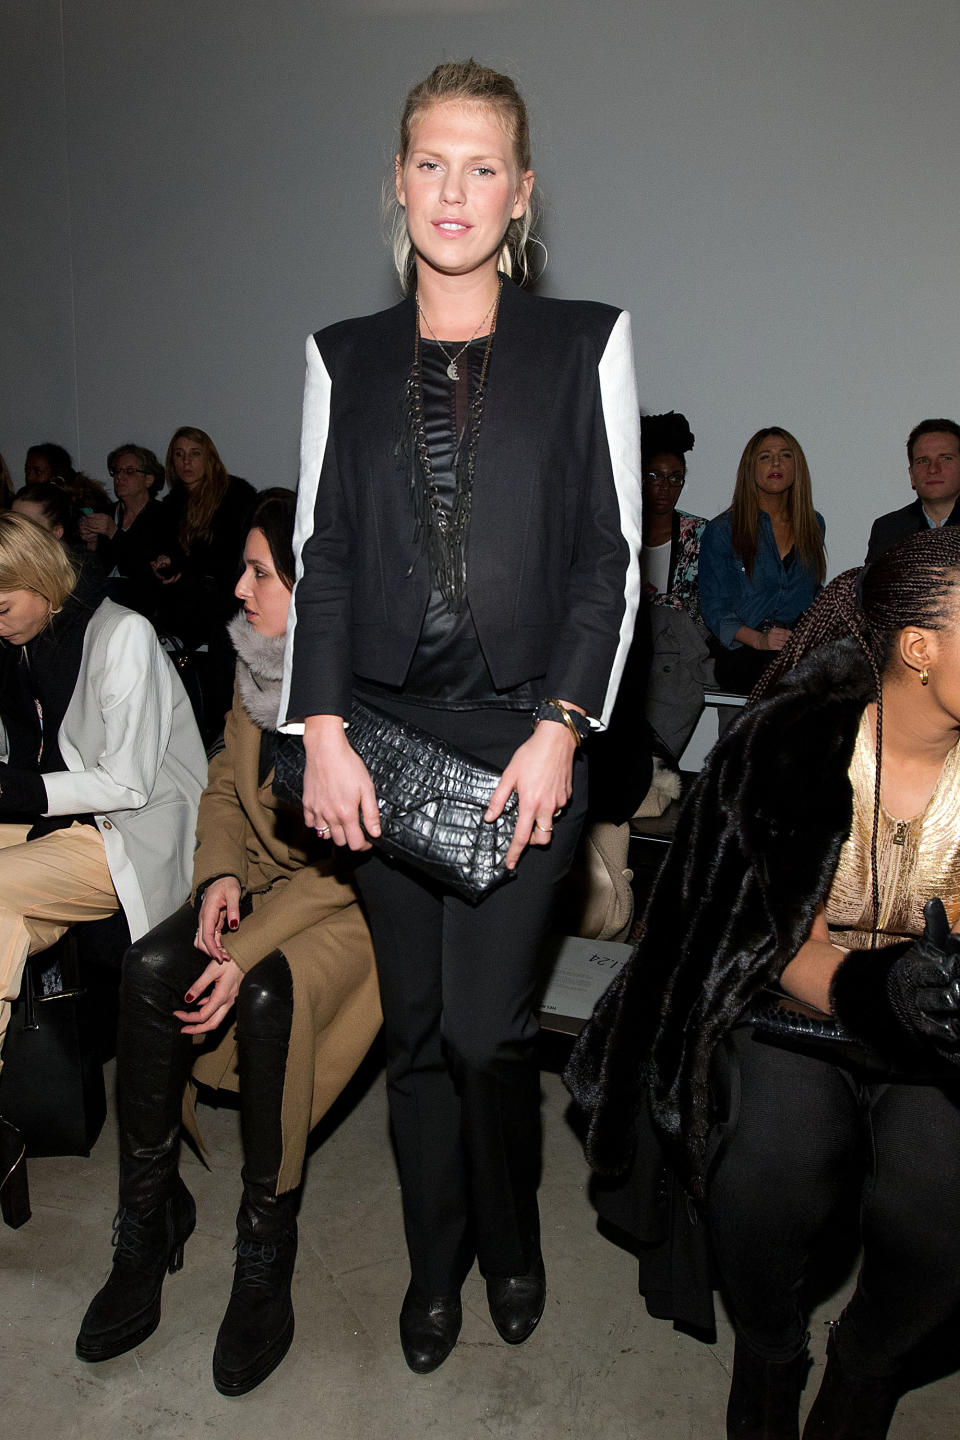 Alexandra Richards attends the Fall 2013 Helmut Lang Runway Show on Friday, Feb., 8, 2013 during Fashion Week in New York. (Photo by Dario Cantatore/Invision/AP)